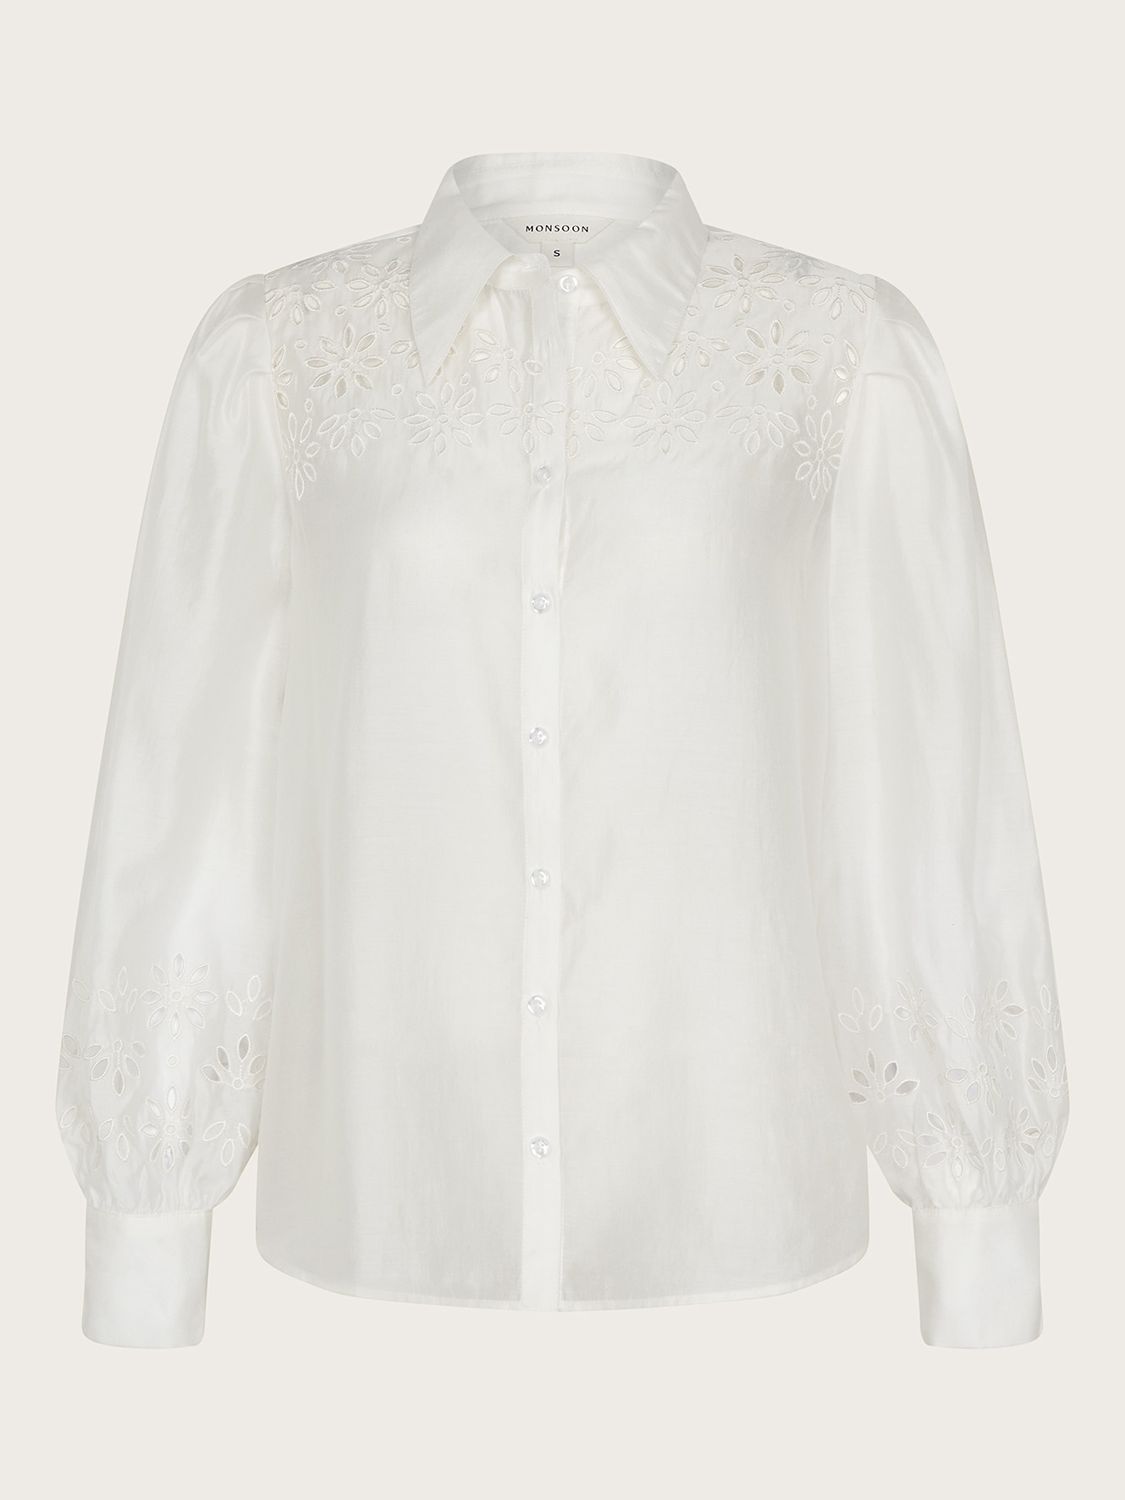 Monsoon Brie Sustainable Cutwork Blouse, Ivory, S